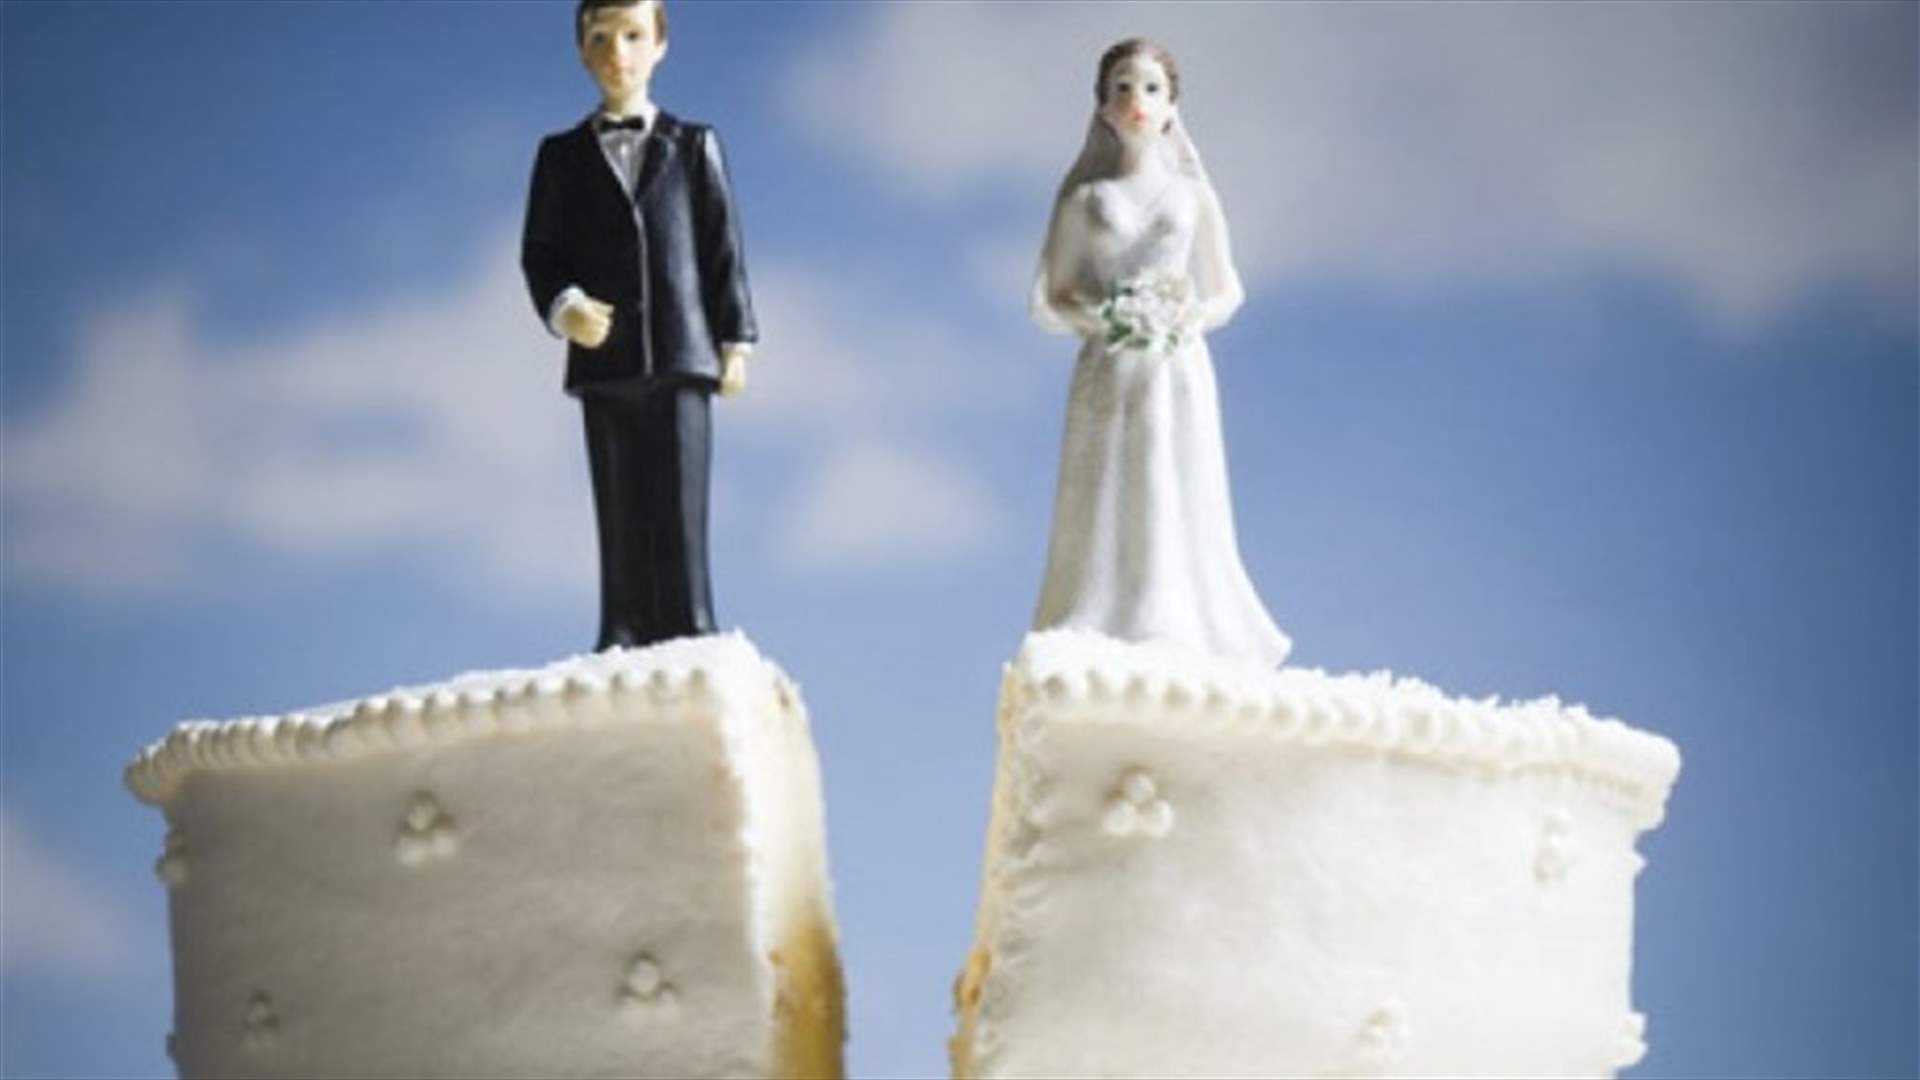 Newlyweds Divorce Because Wife “Was Too Busy Texting Her Friends”